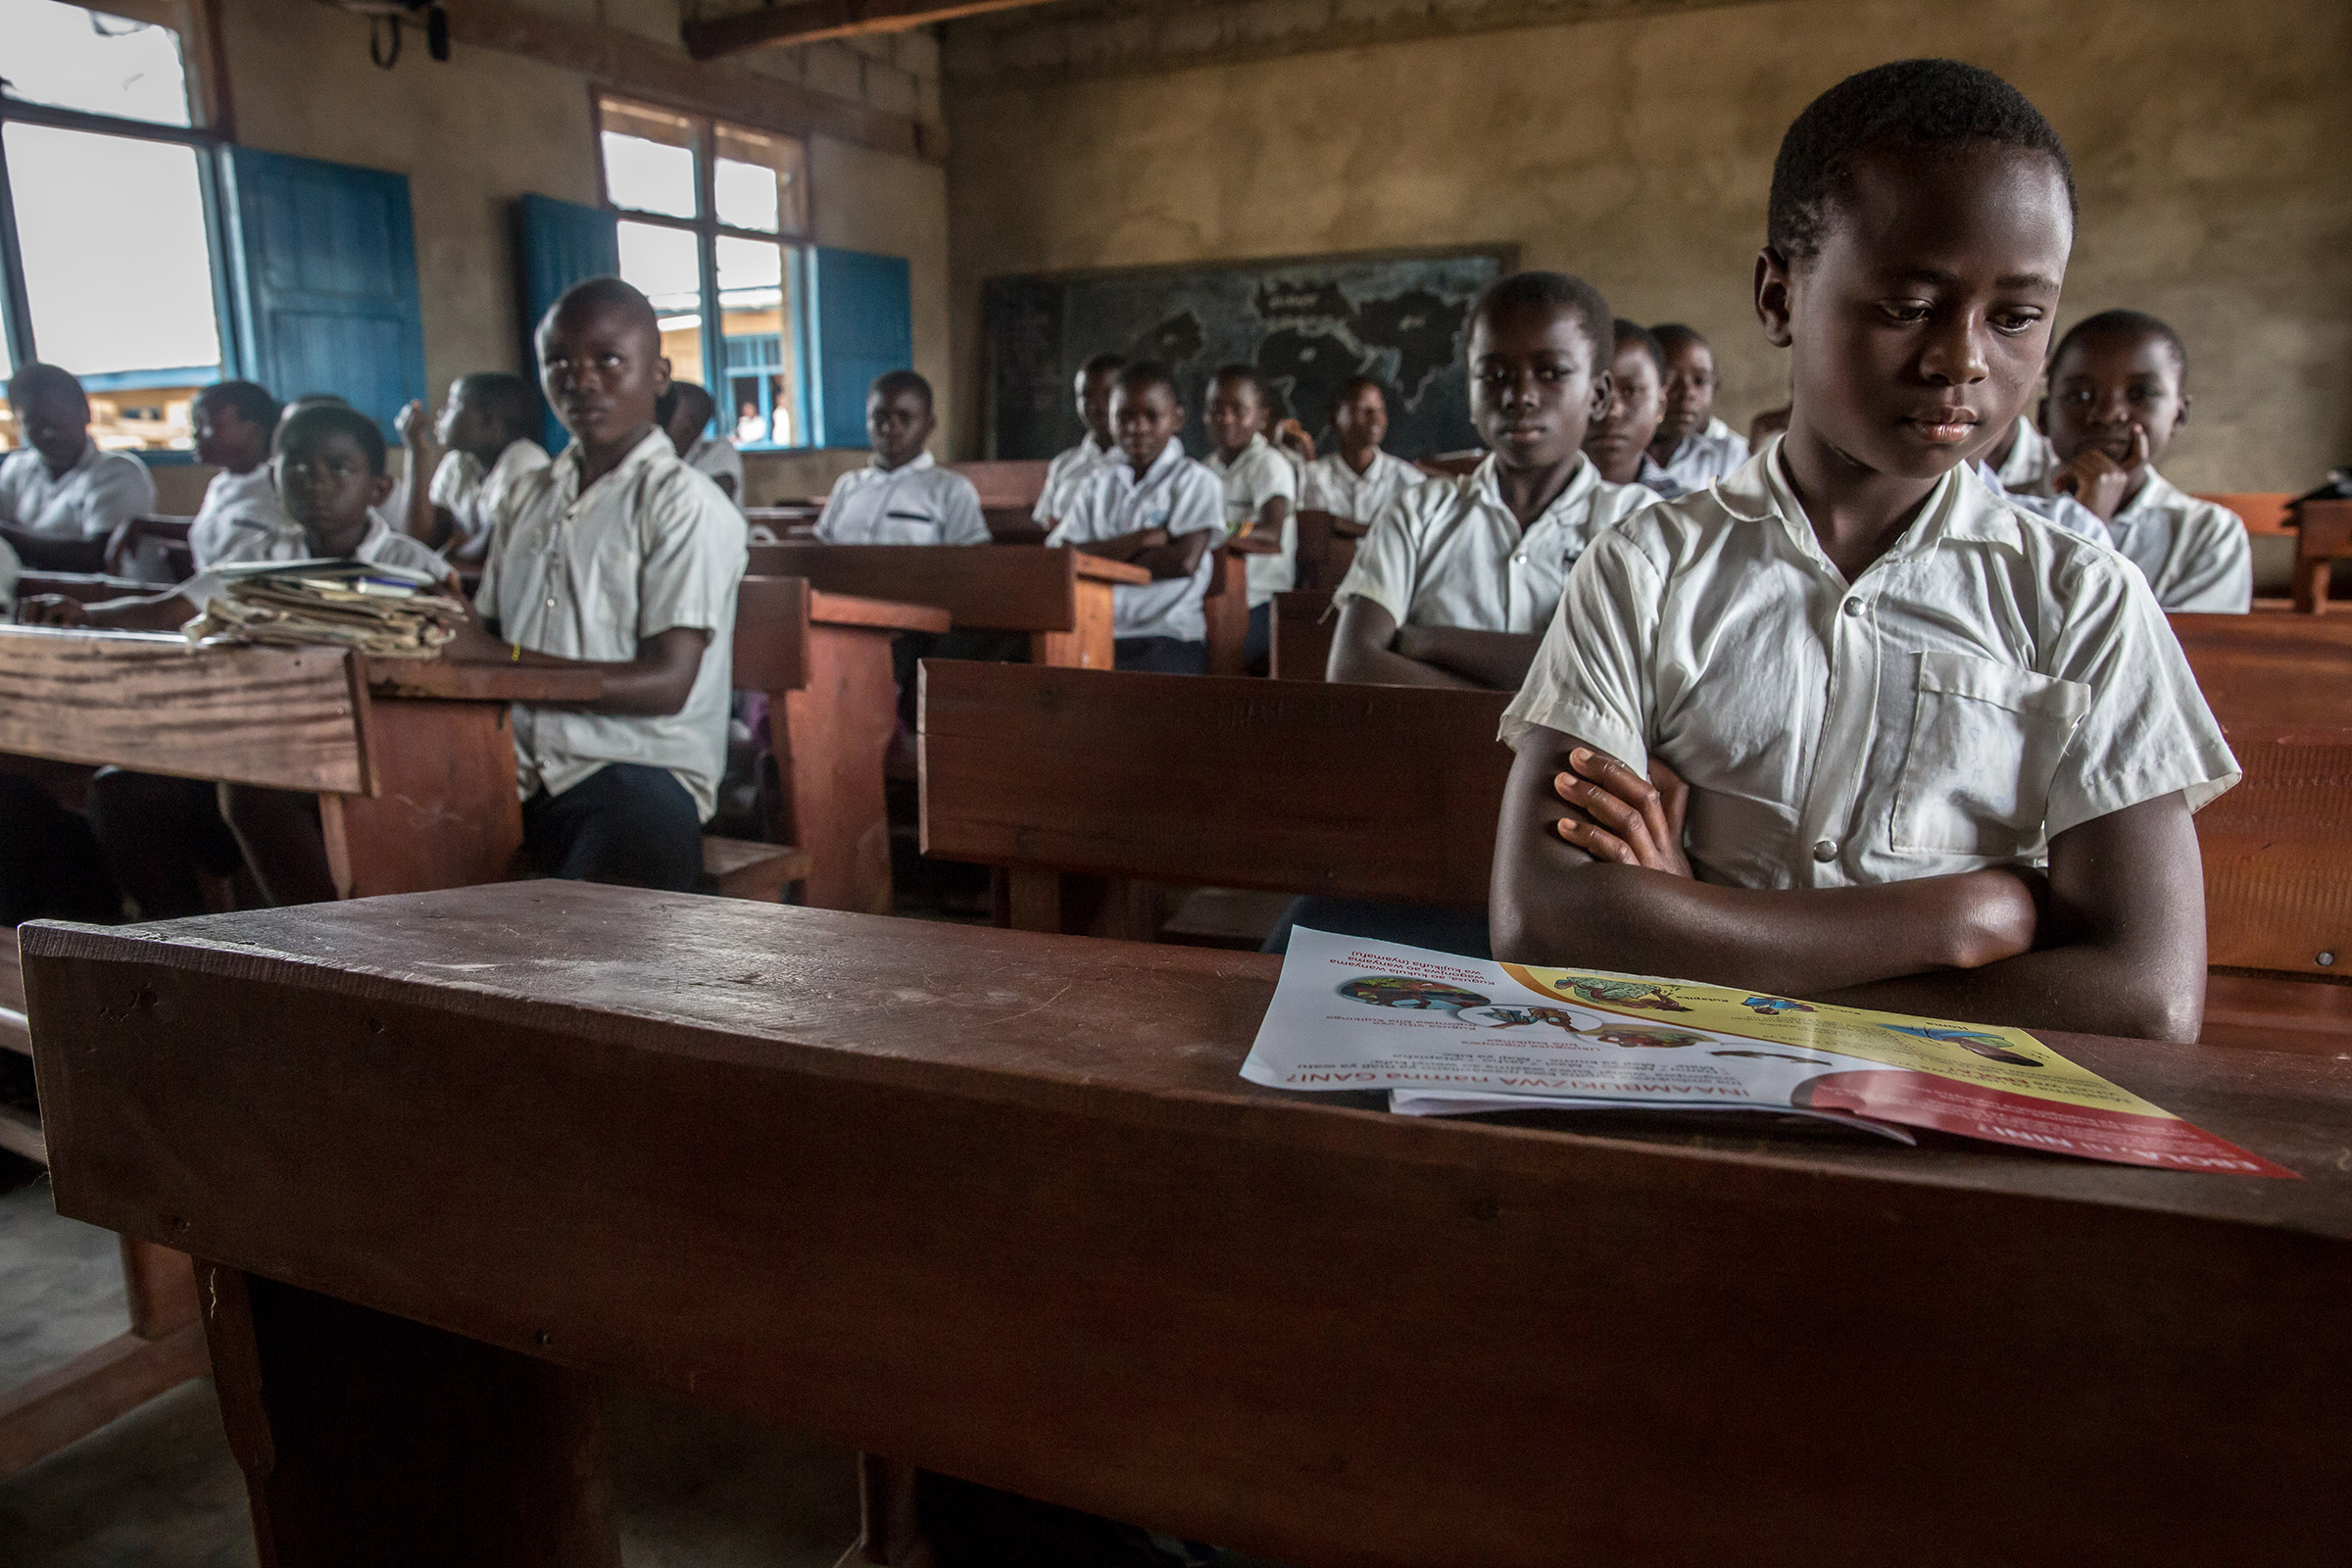 Students are taught about Ebola in a school in Beni, DRC, close to where the outbreak began last August. Heath workers believe by teaching children about the symptoms of Ebola they can educate some parents too. (Sally Hayden)